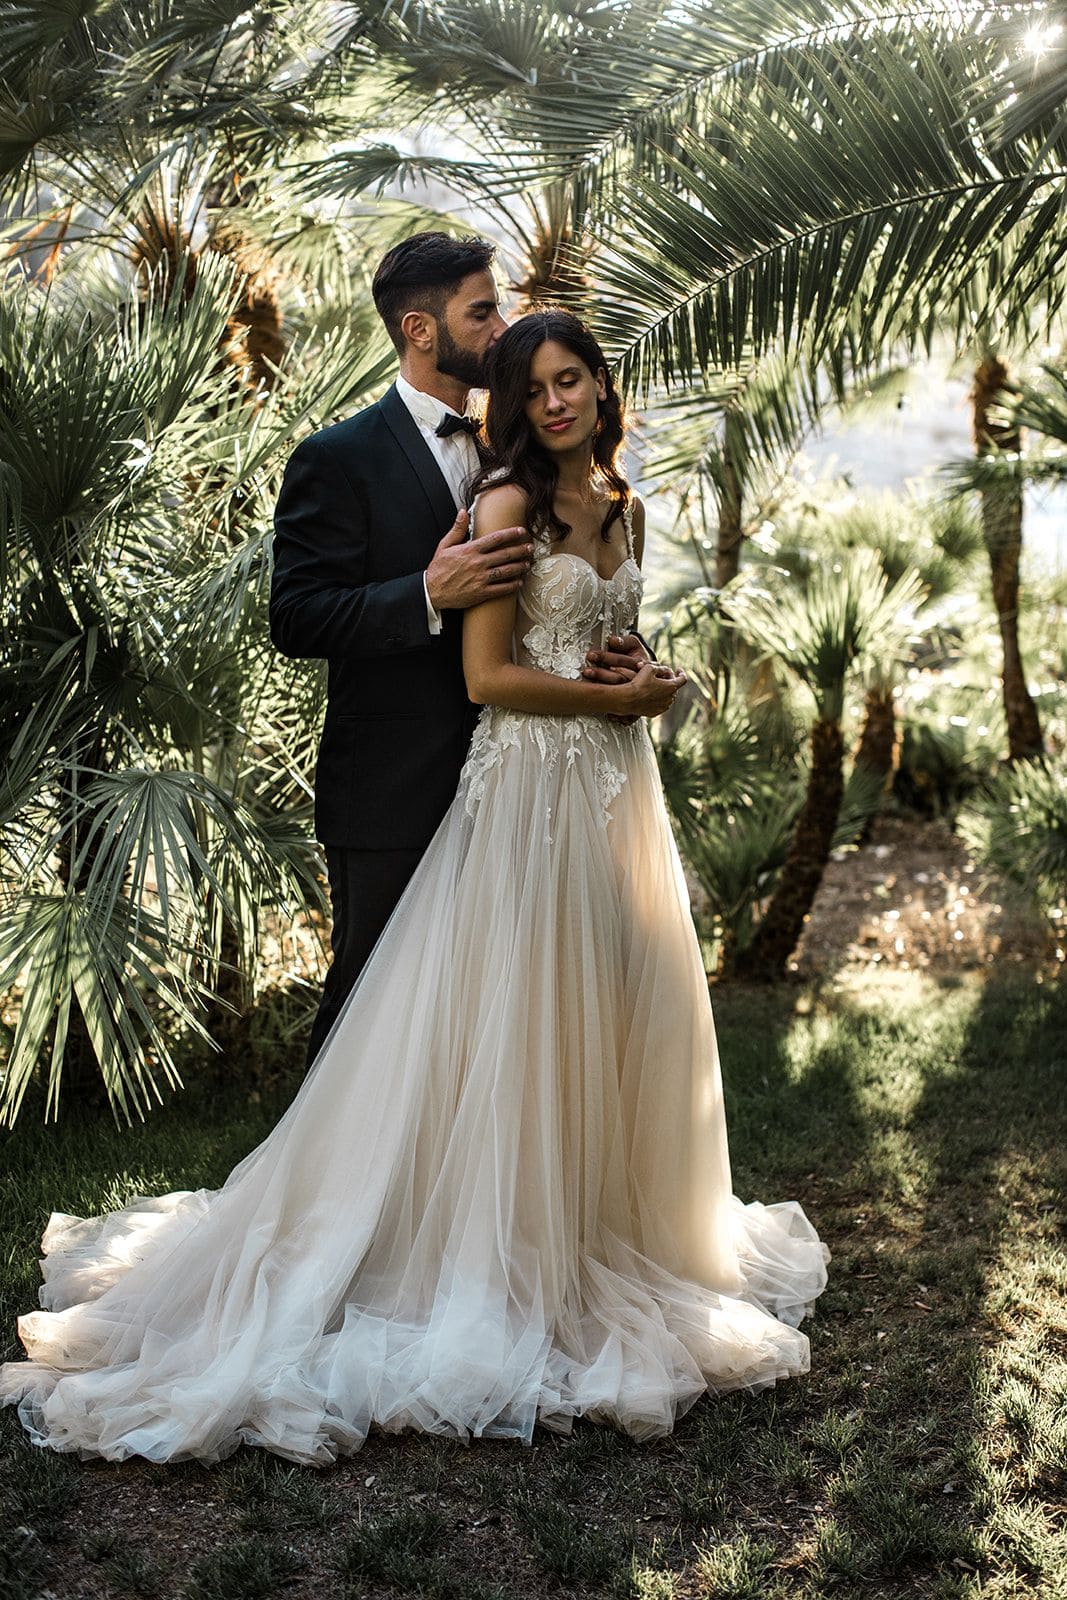 Bride and groom stand together amidst foliage in Villa Astor